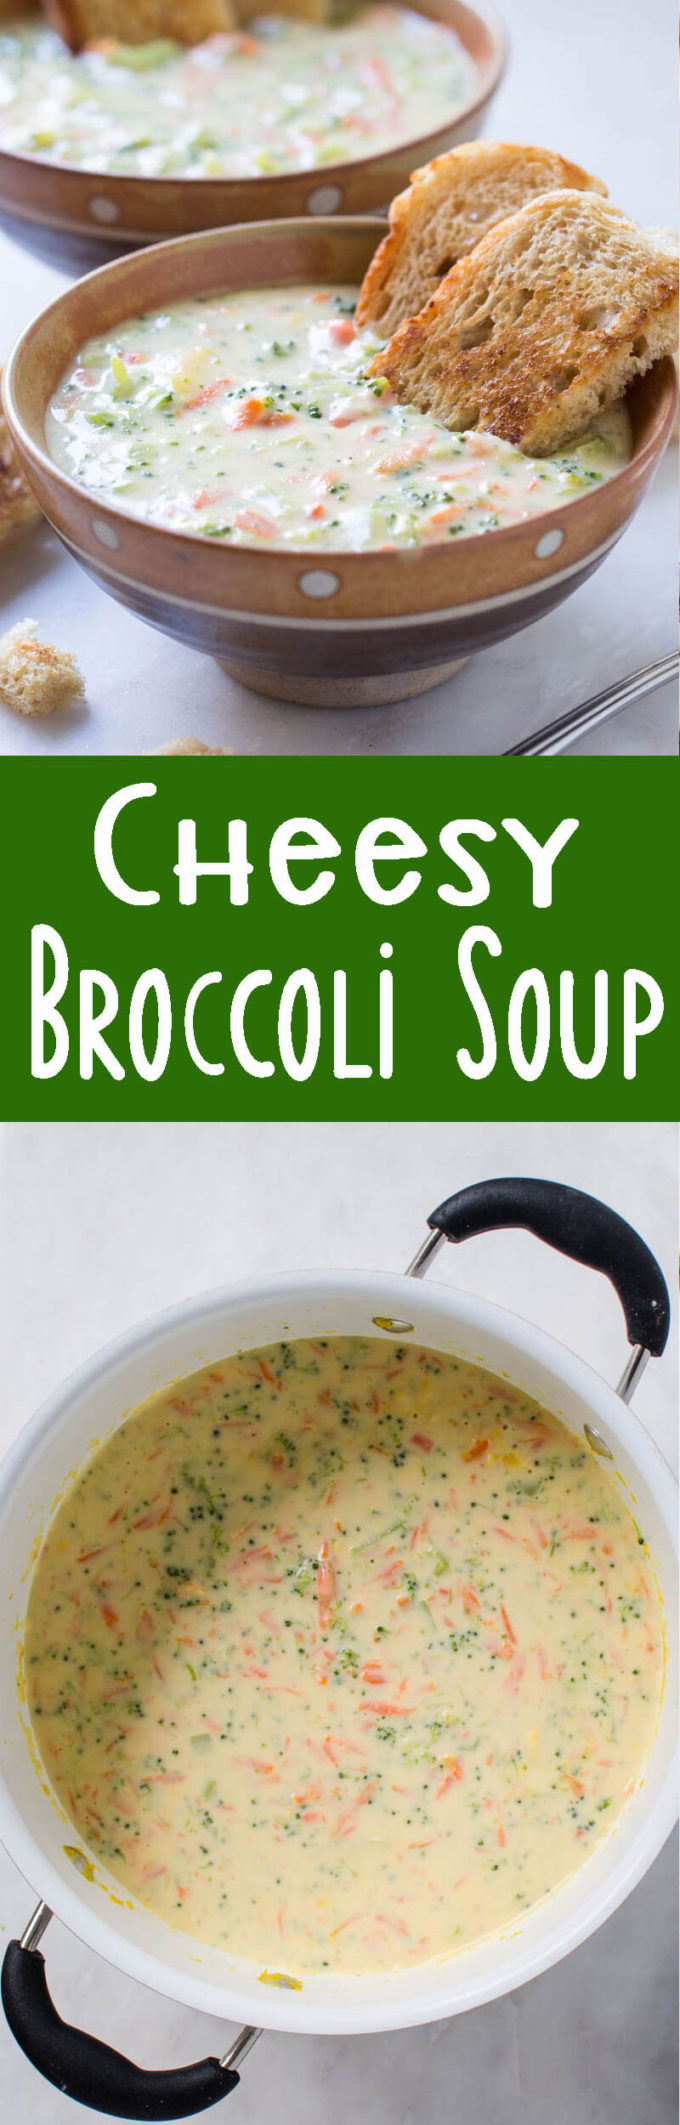 Cheesy broccoli soup is an awesome homemade soup that is creamy, homemade, and easy to make 